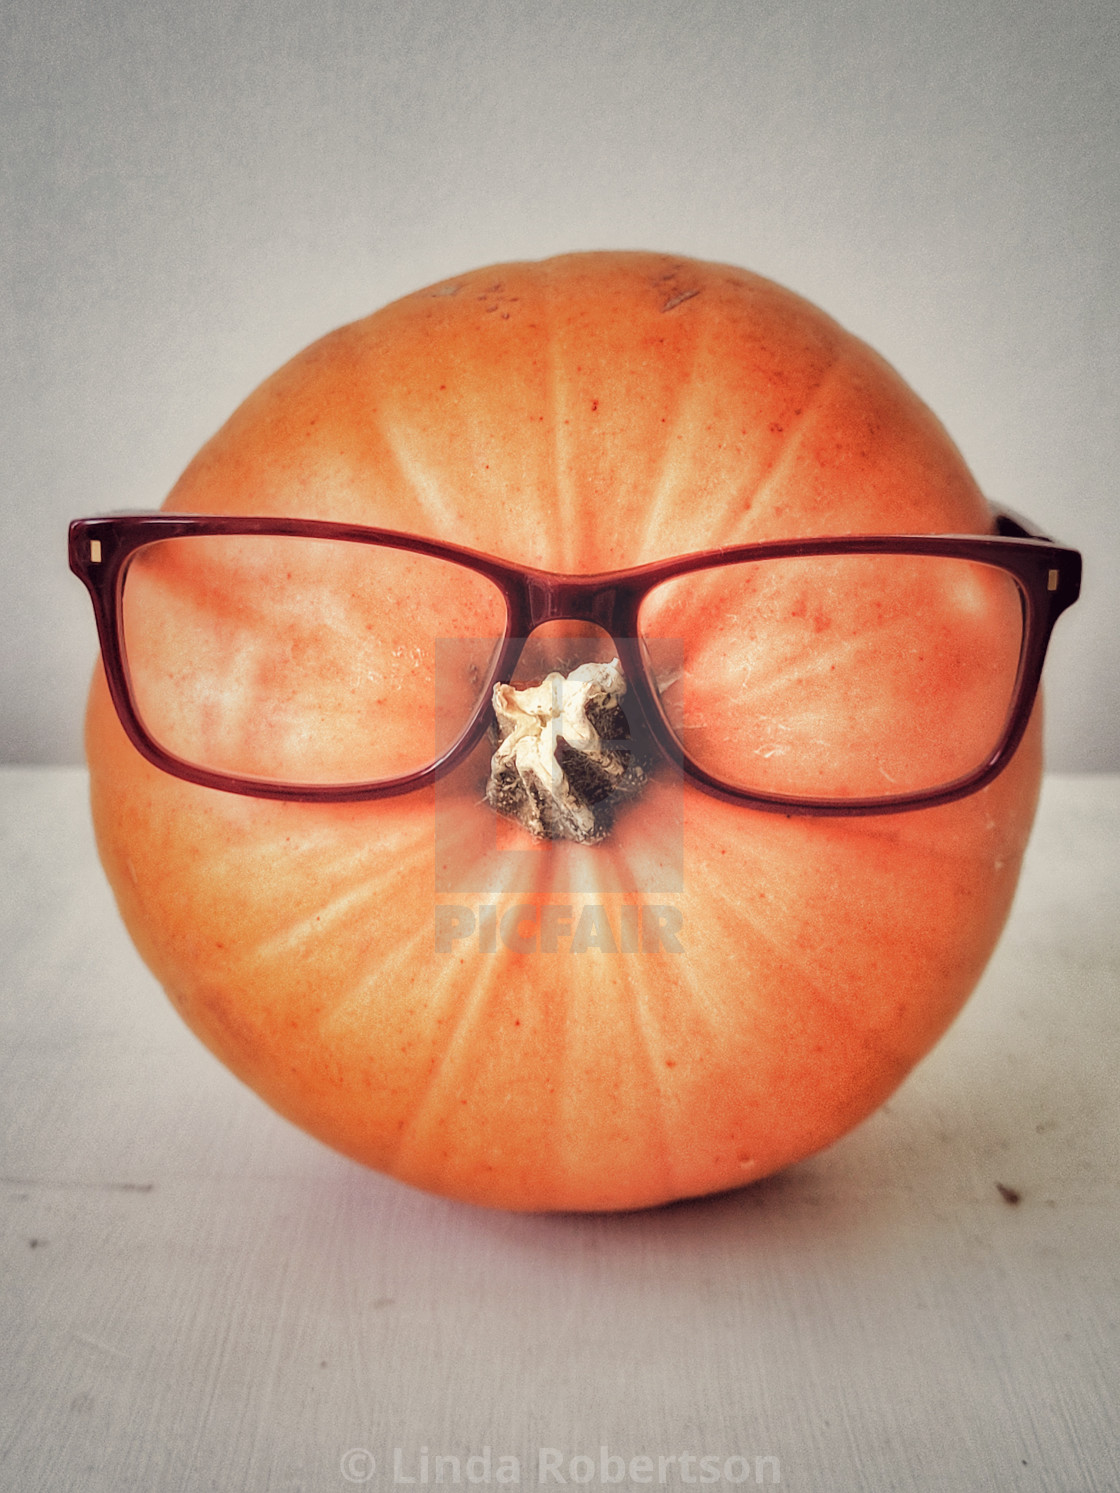 "Glasses on a pumpkin" stock image